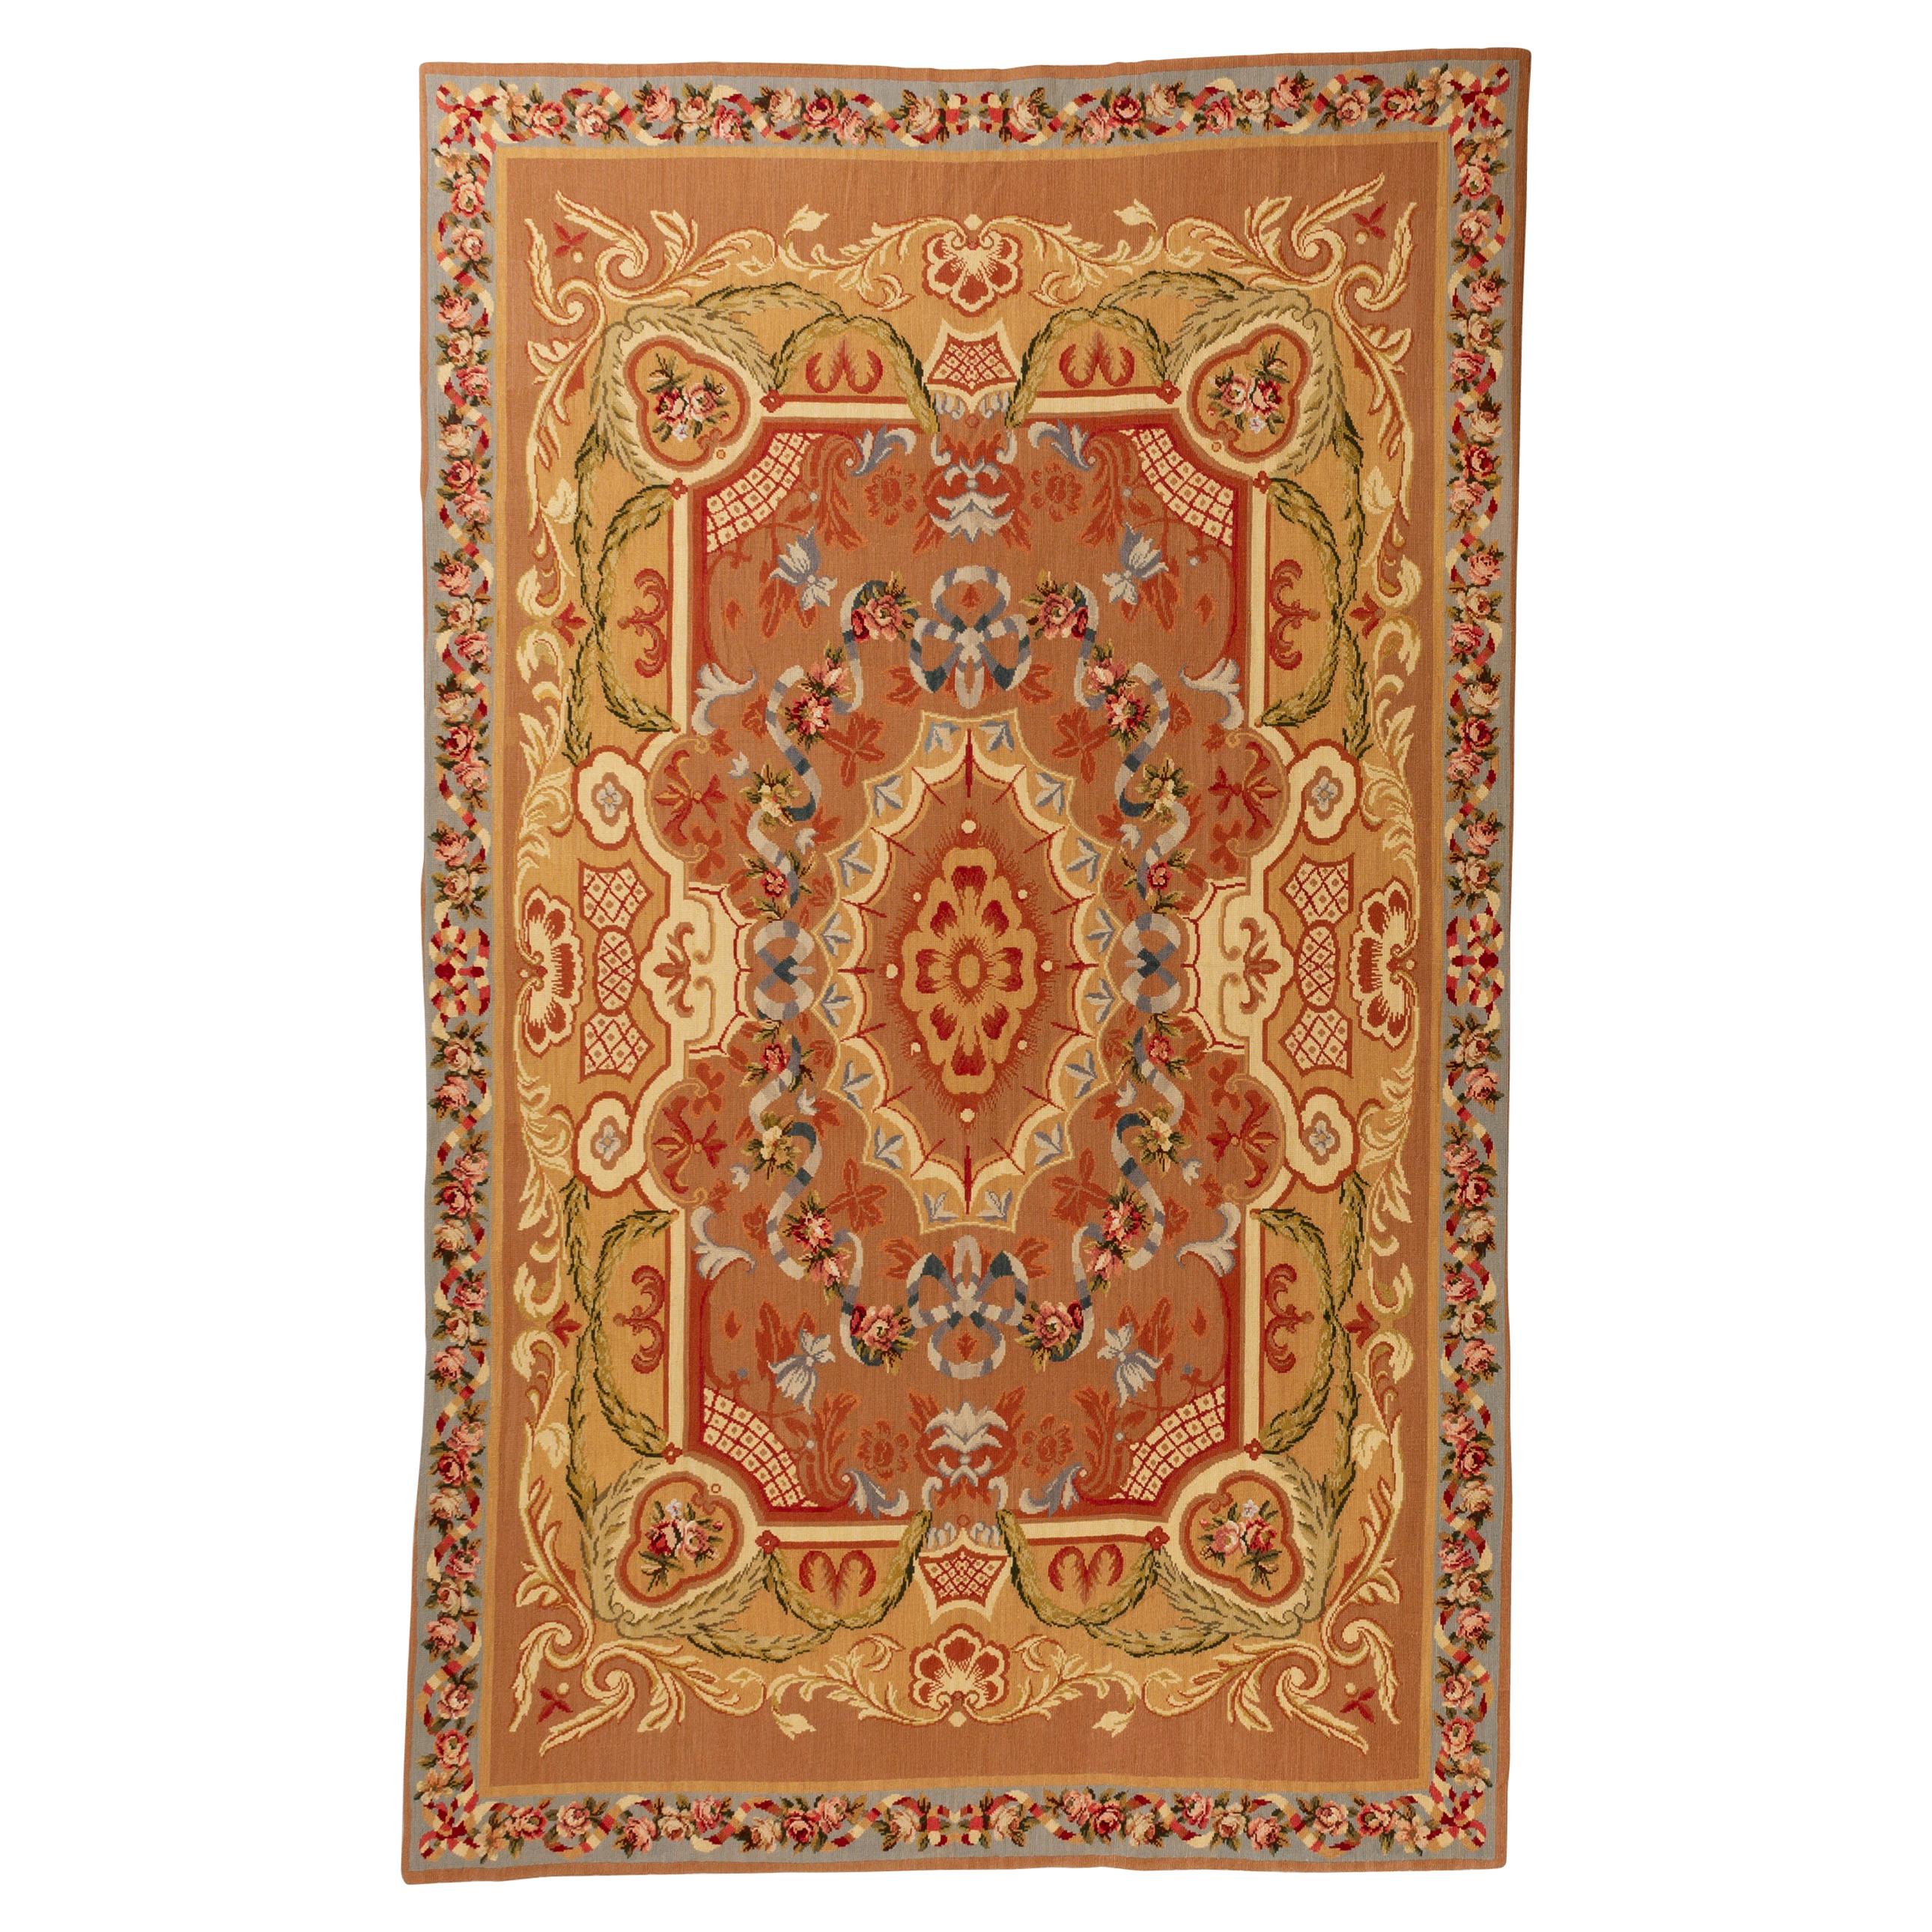 Needle Point Carpet or Tapestry in Aubusson Style